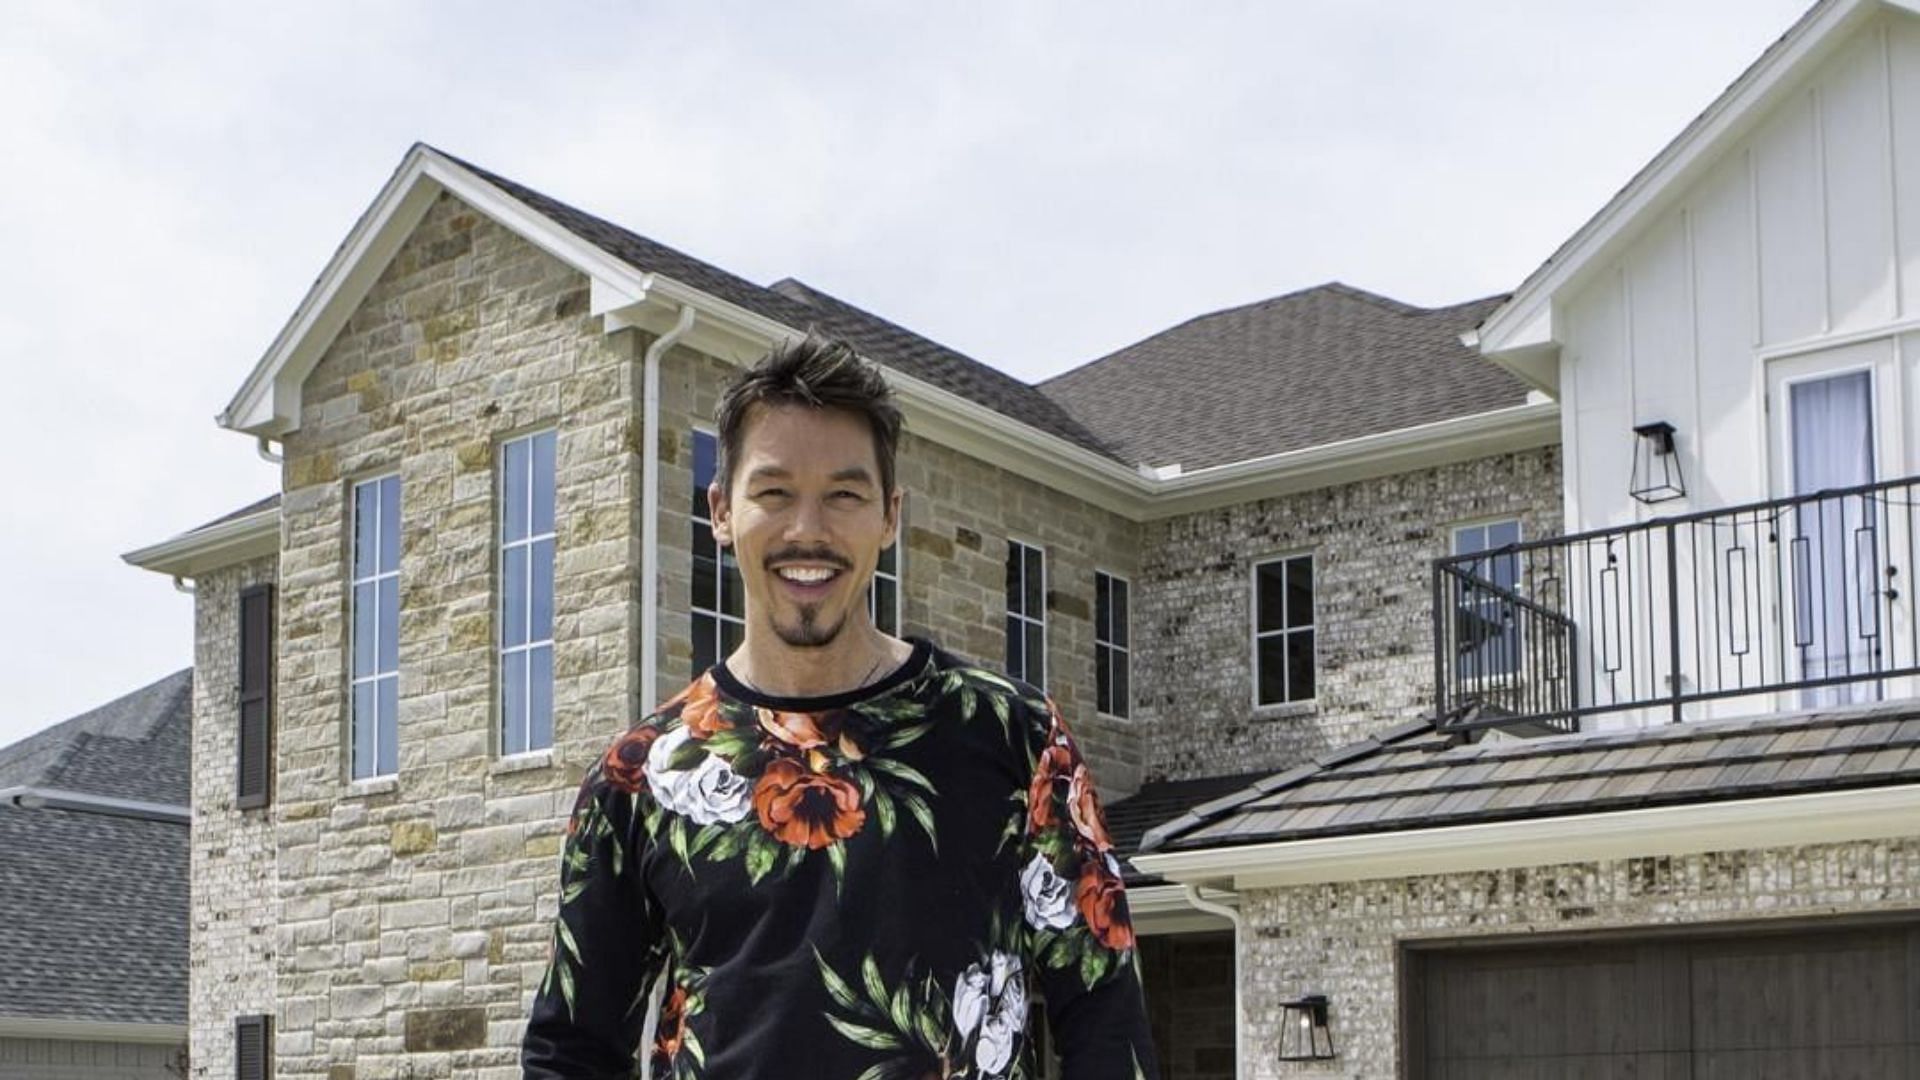 David Bromstand returns with My Lottery Dream Home